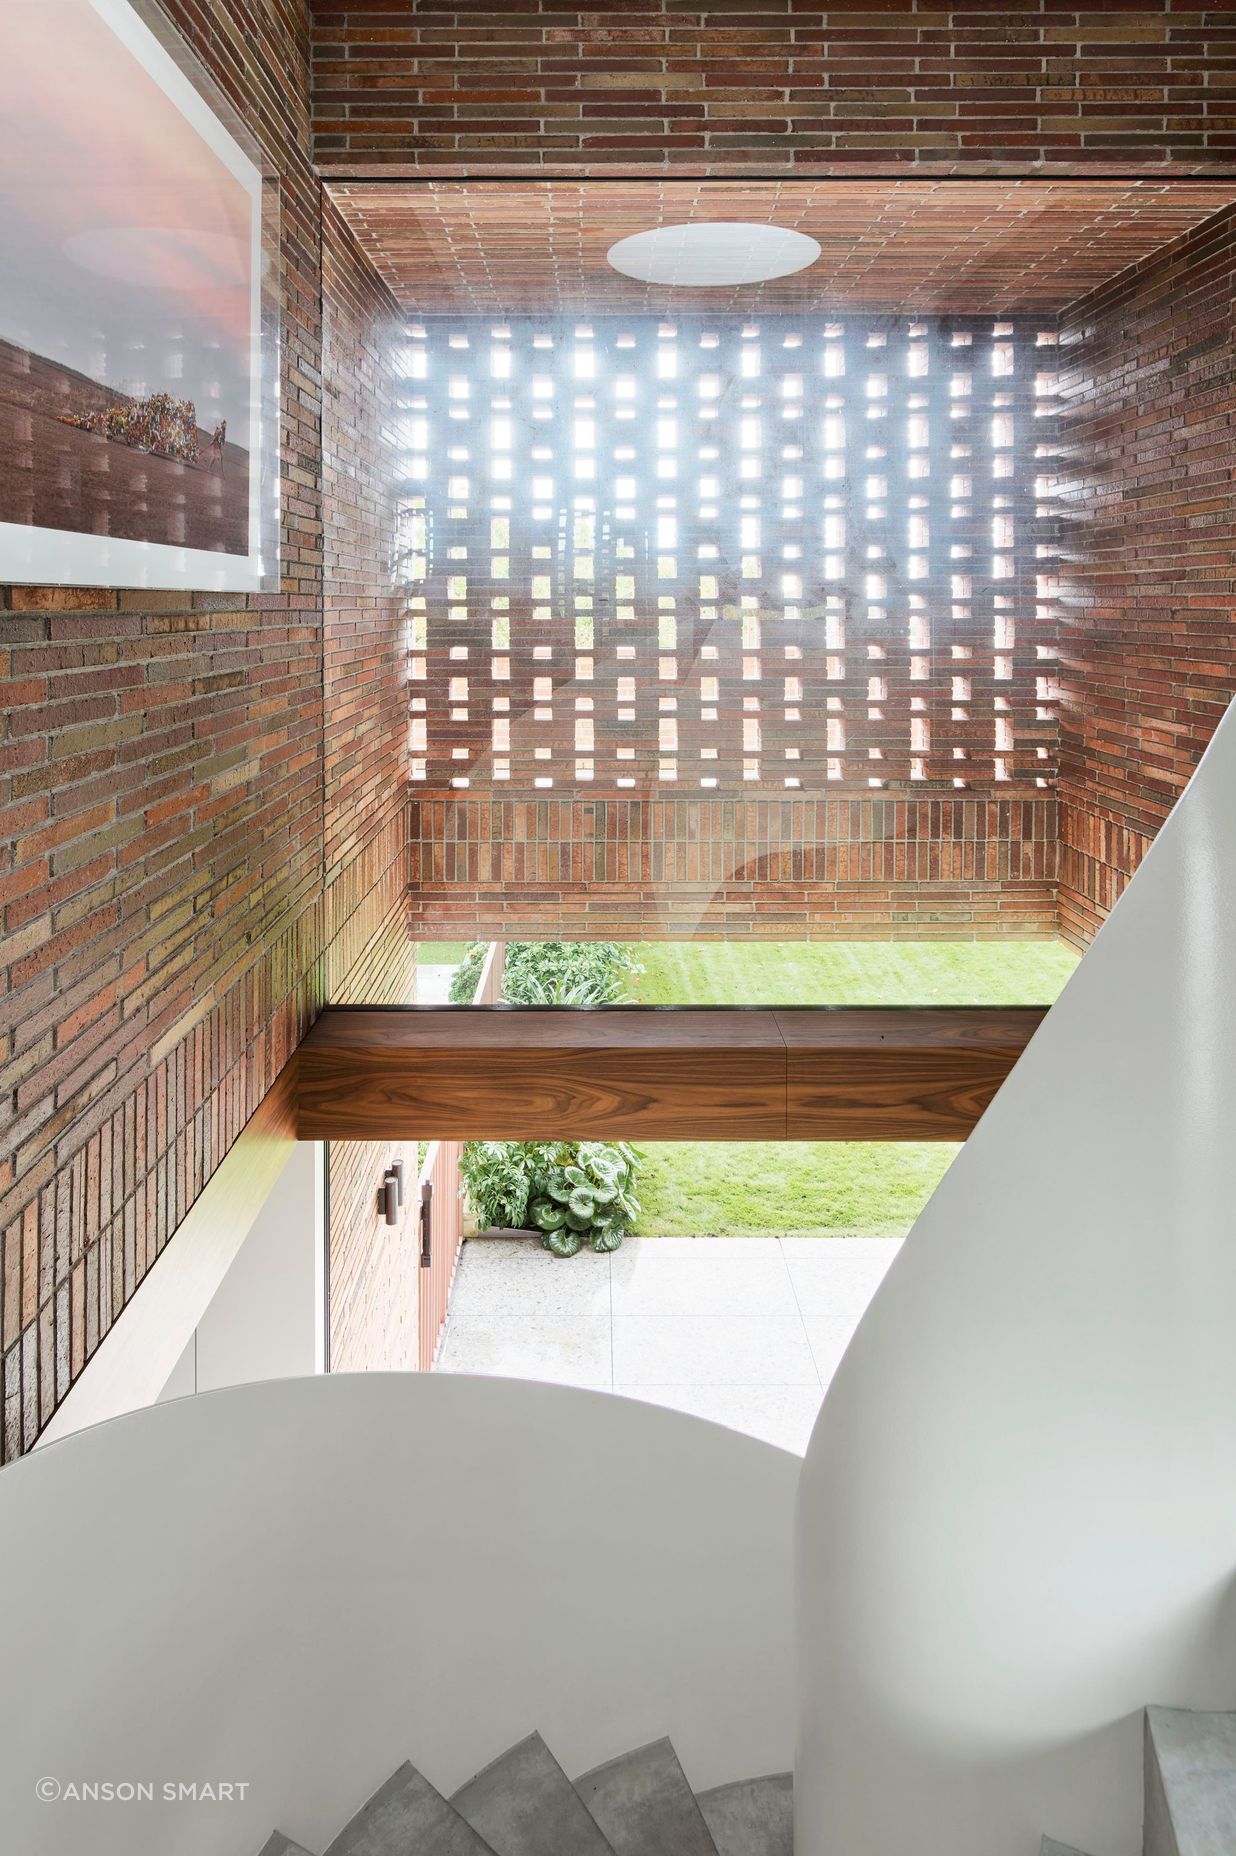 A hit-and-miss wall adds contrast to the Emperor linear-shaped bricks.